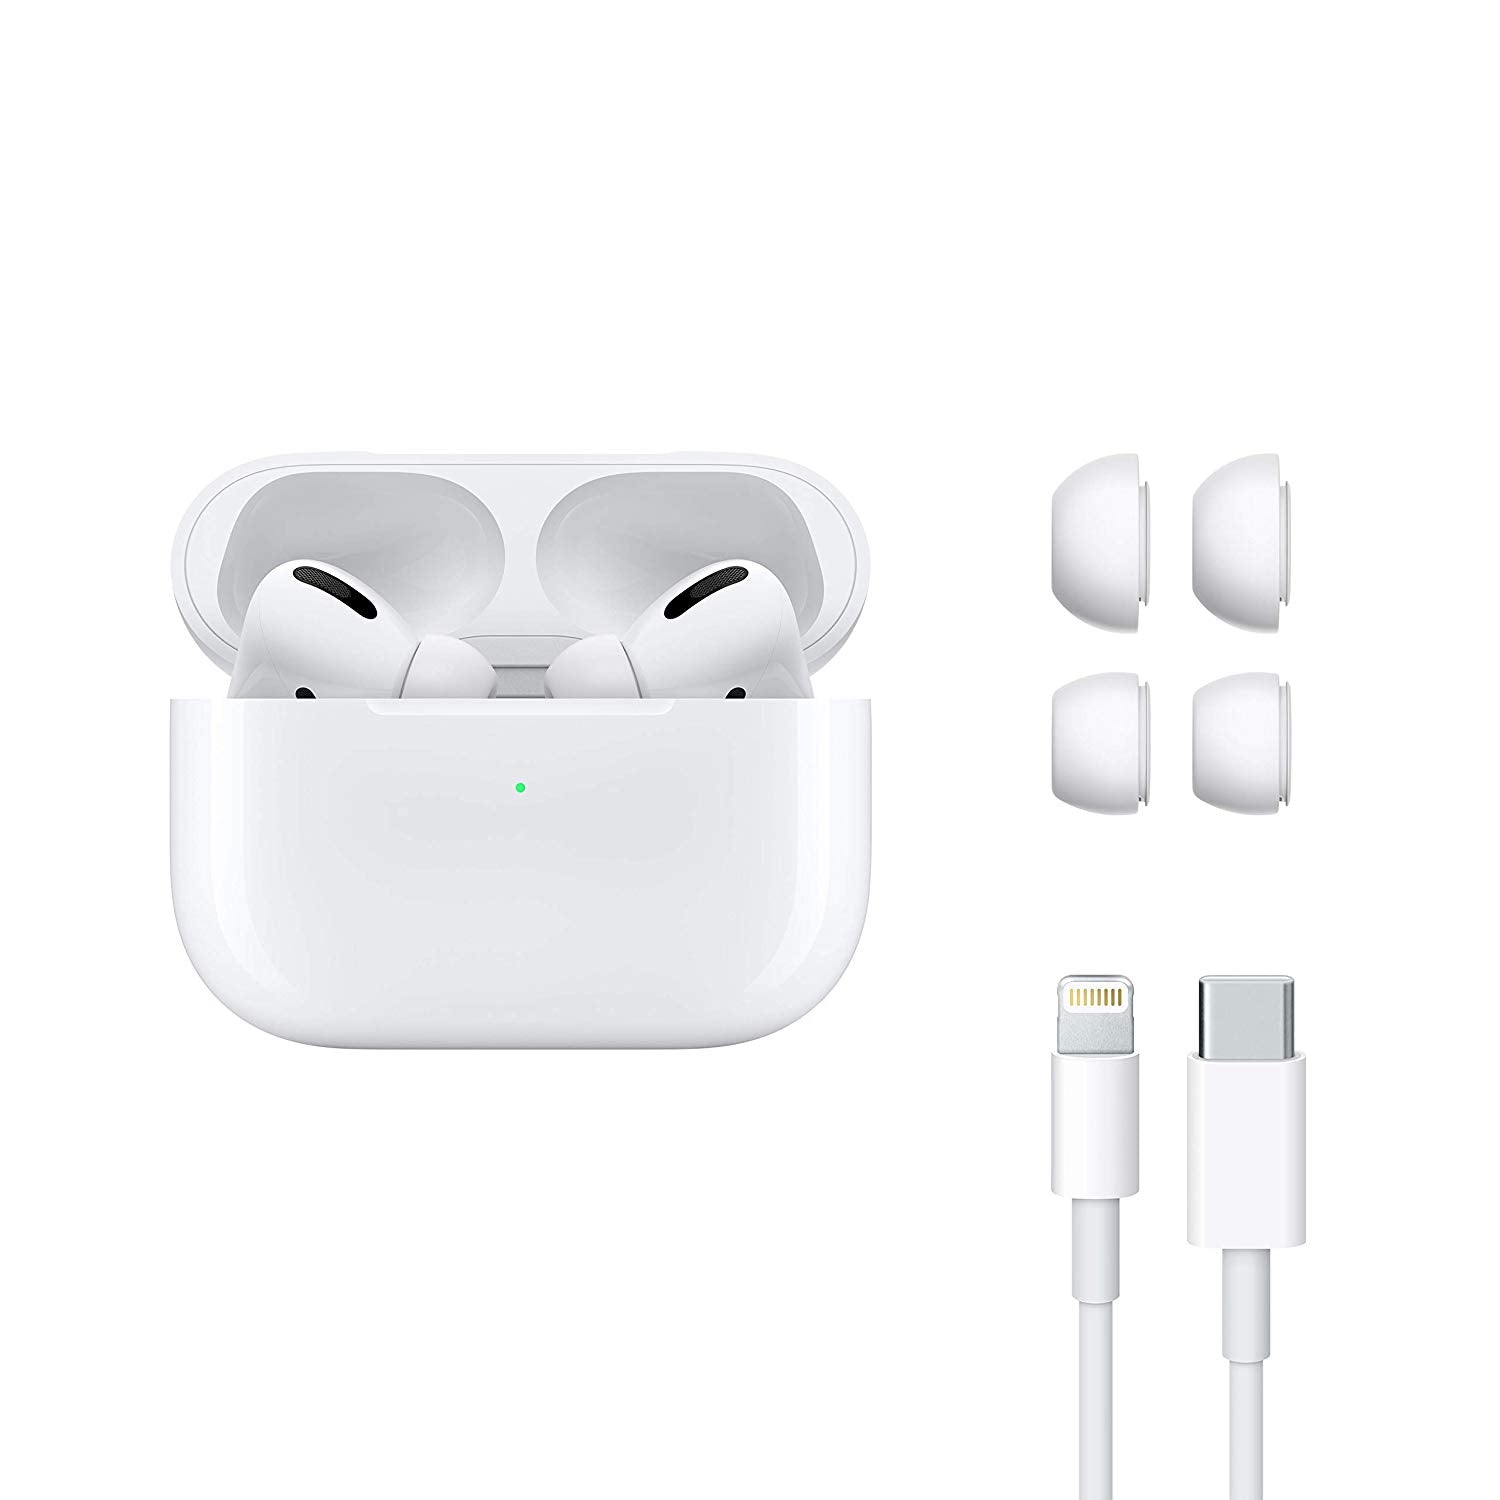 Open Box, Unused Apple AirPods Pro 2nd Generation